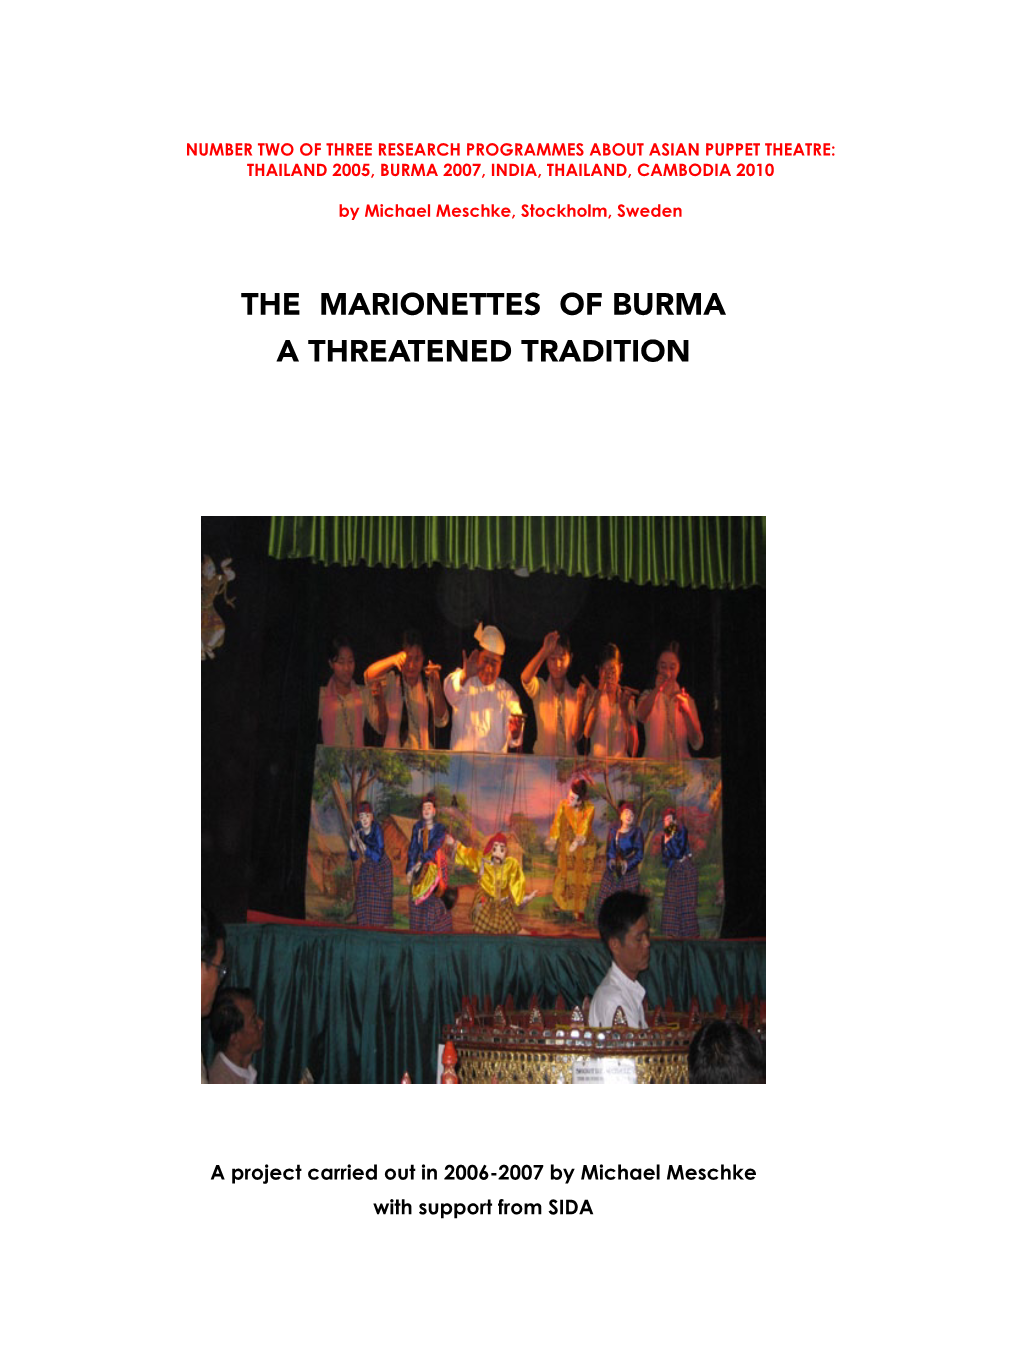 The Marionettes of Burma a Threatened Tradition